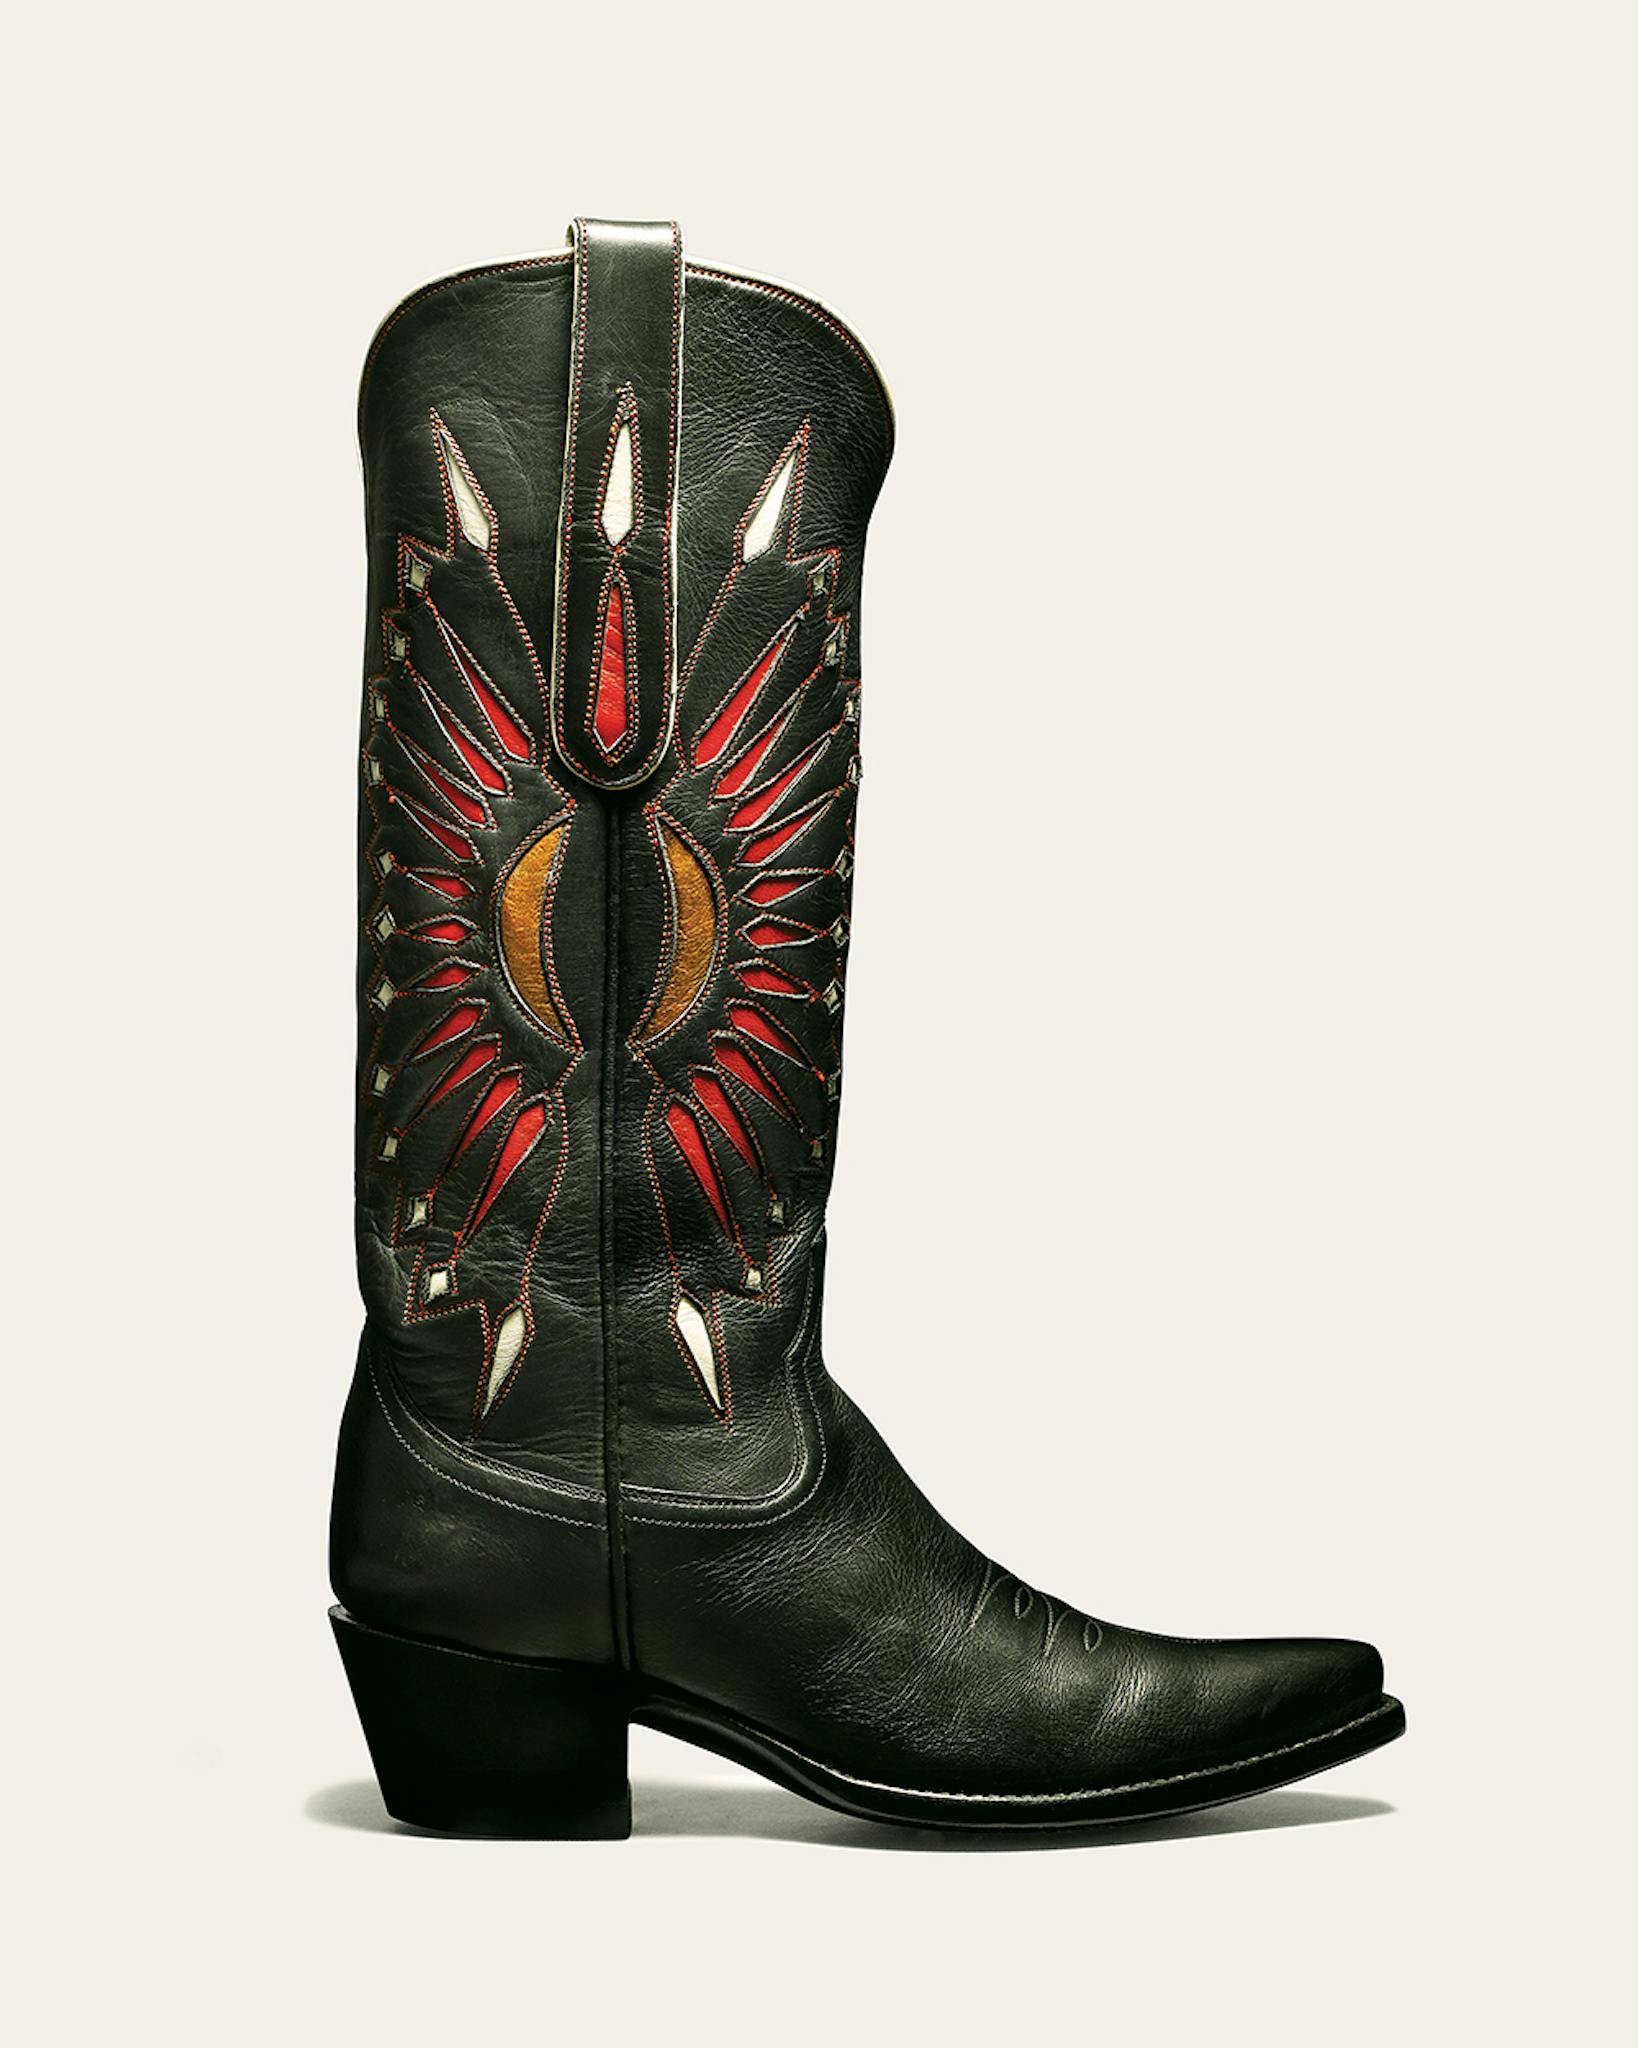 Tall black Stallion Boots boos with red, white, and orange details.